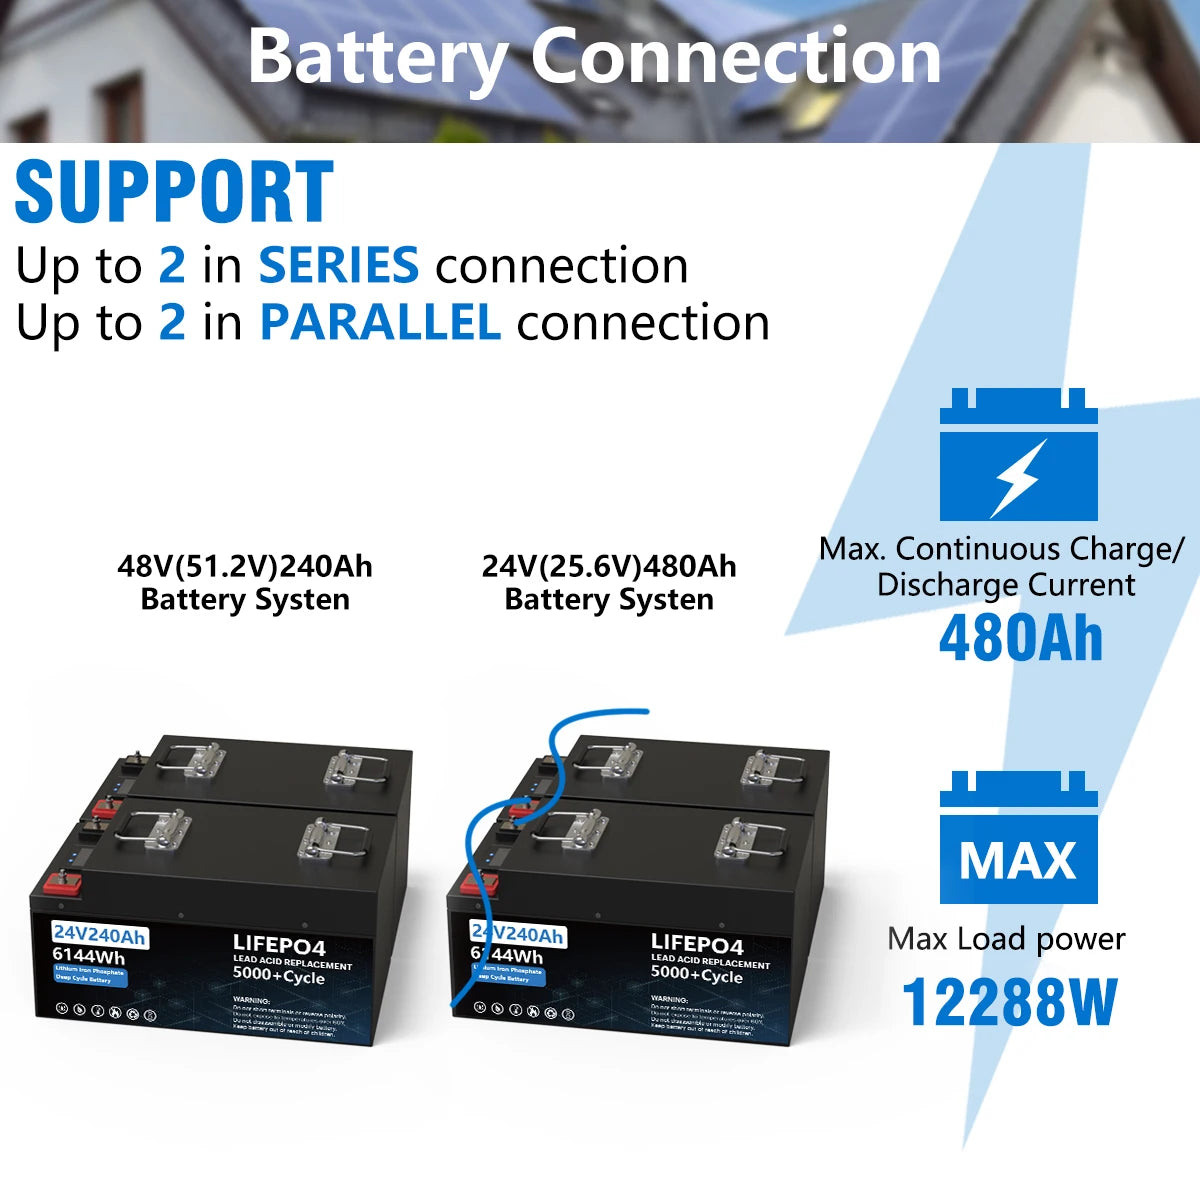 LiFePO4 24V 200AH Battery, High-capacity LiFePO4 battery pack for series/parallel configurations and lead-acid replacement.